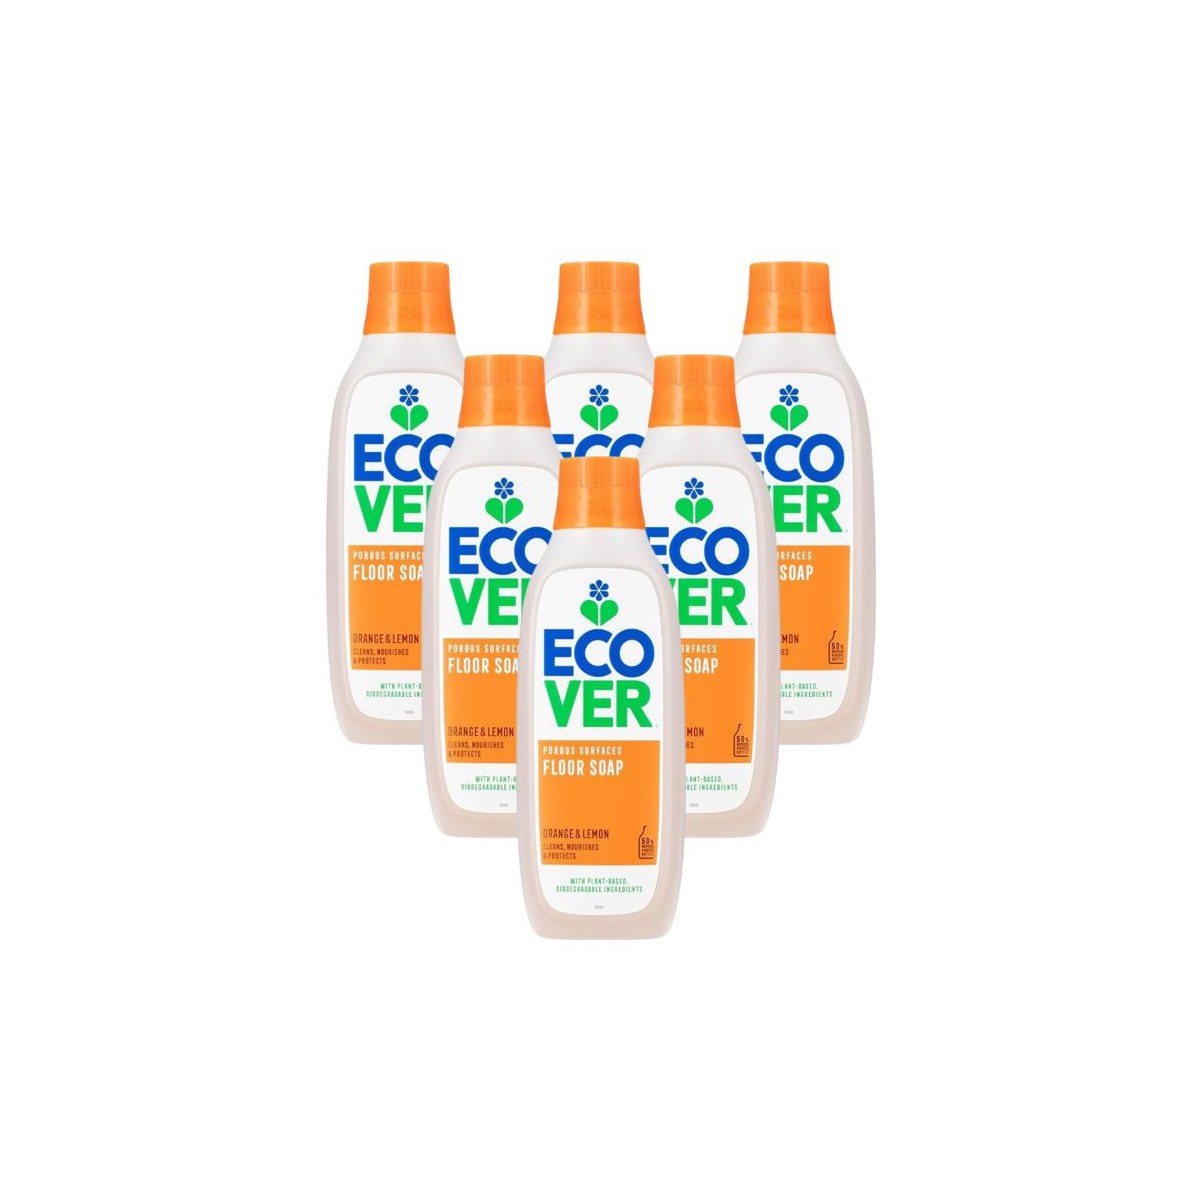 Case of 6 x Ecover Floor Soap